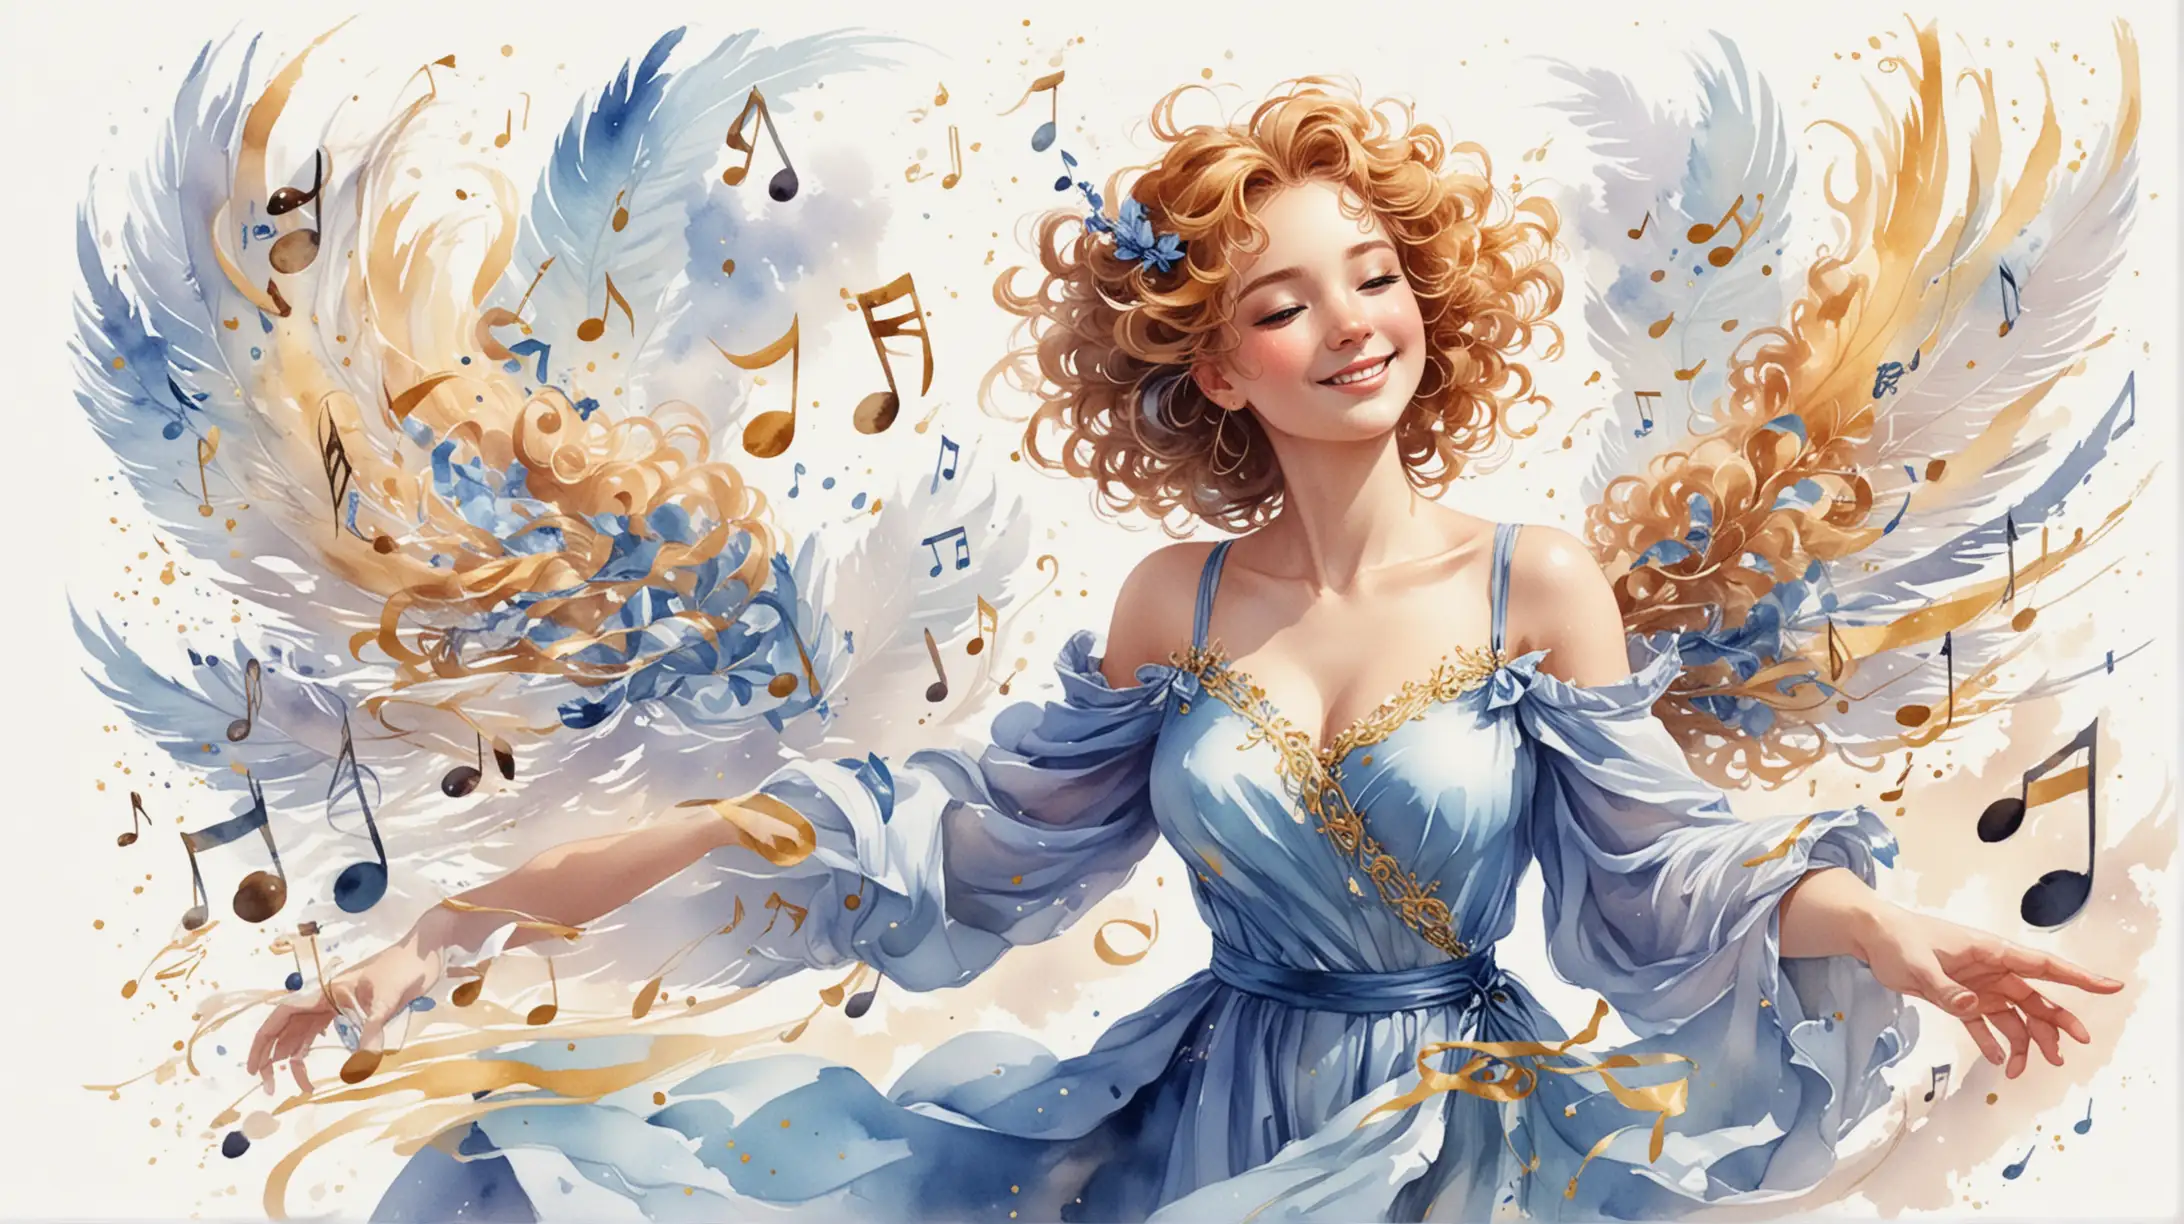 on a white background, painted in watercolor in anime style, the girl muse Euterpe in a light flying havenly blue dress, a happy smile, colorful notes fly out of developing hair, wings from notes, wind, flight, holds a treble clef in elegant palms, inspiration, fantasy, music, curly gold ribbons of black notes